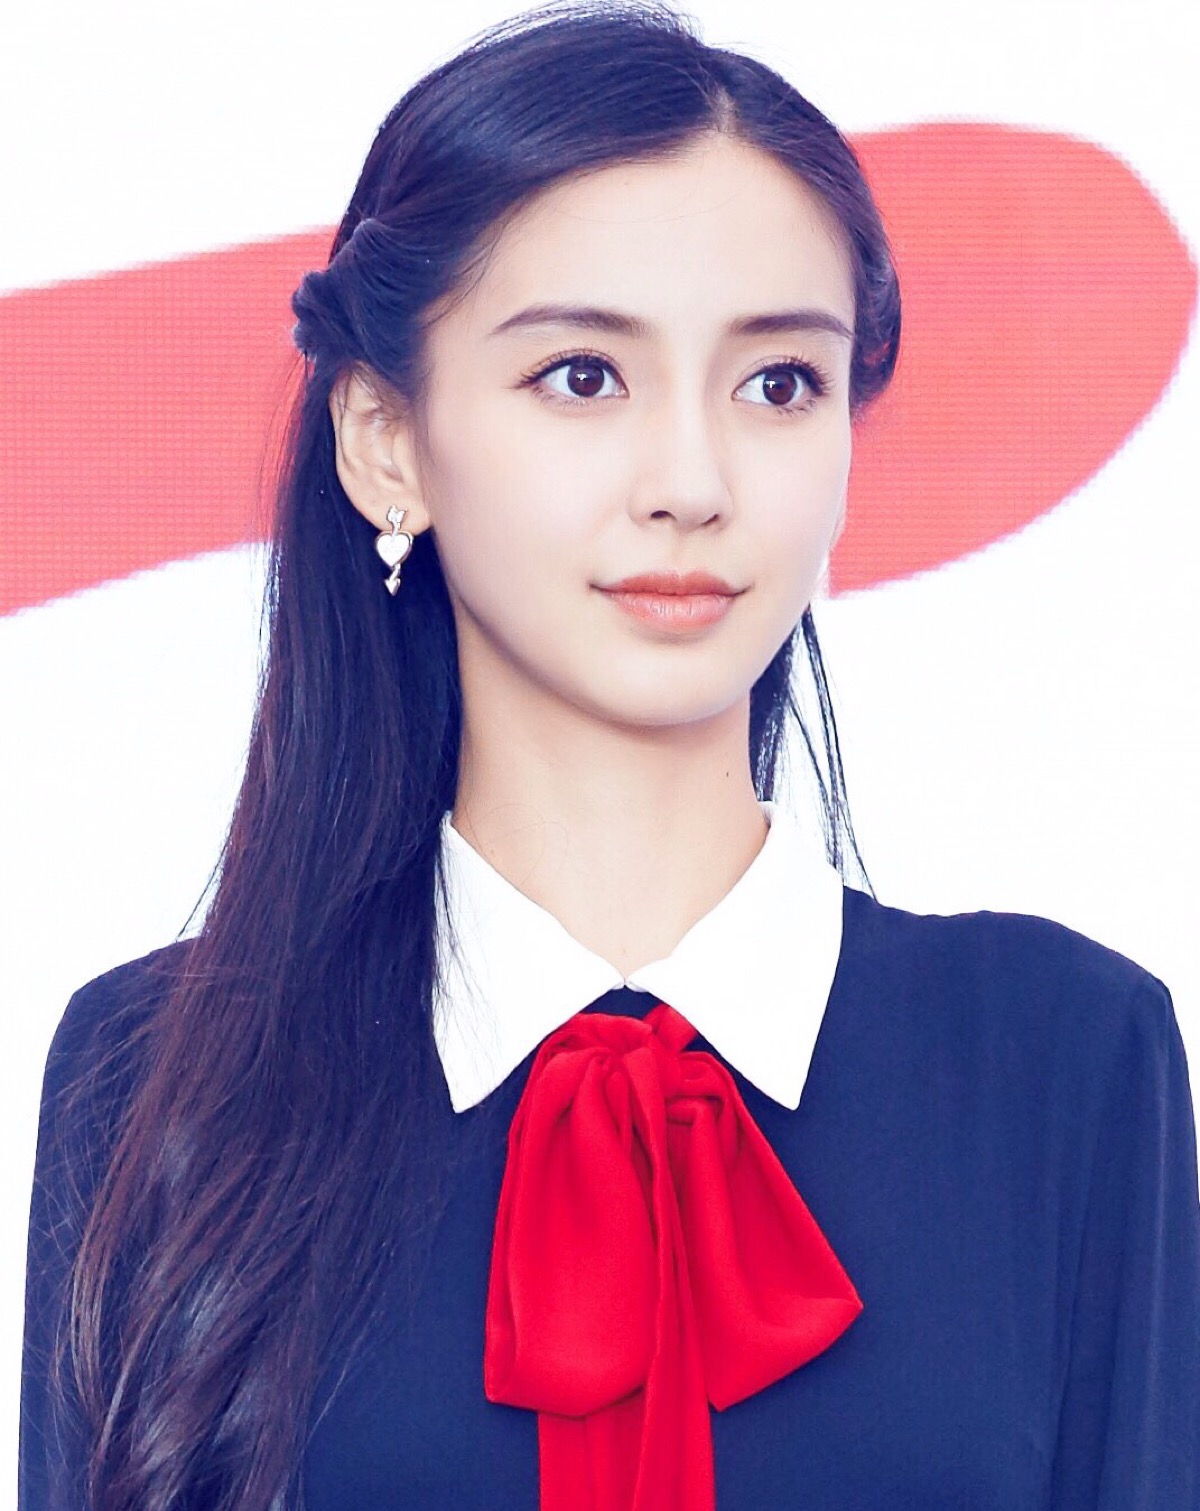 AngelaBaby Style, Clothes, Outfits and Fashion • CelebMafia